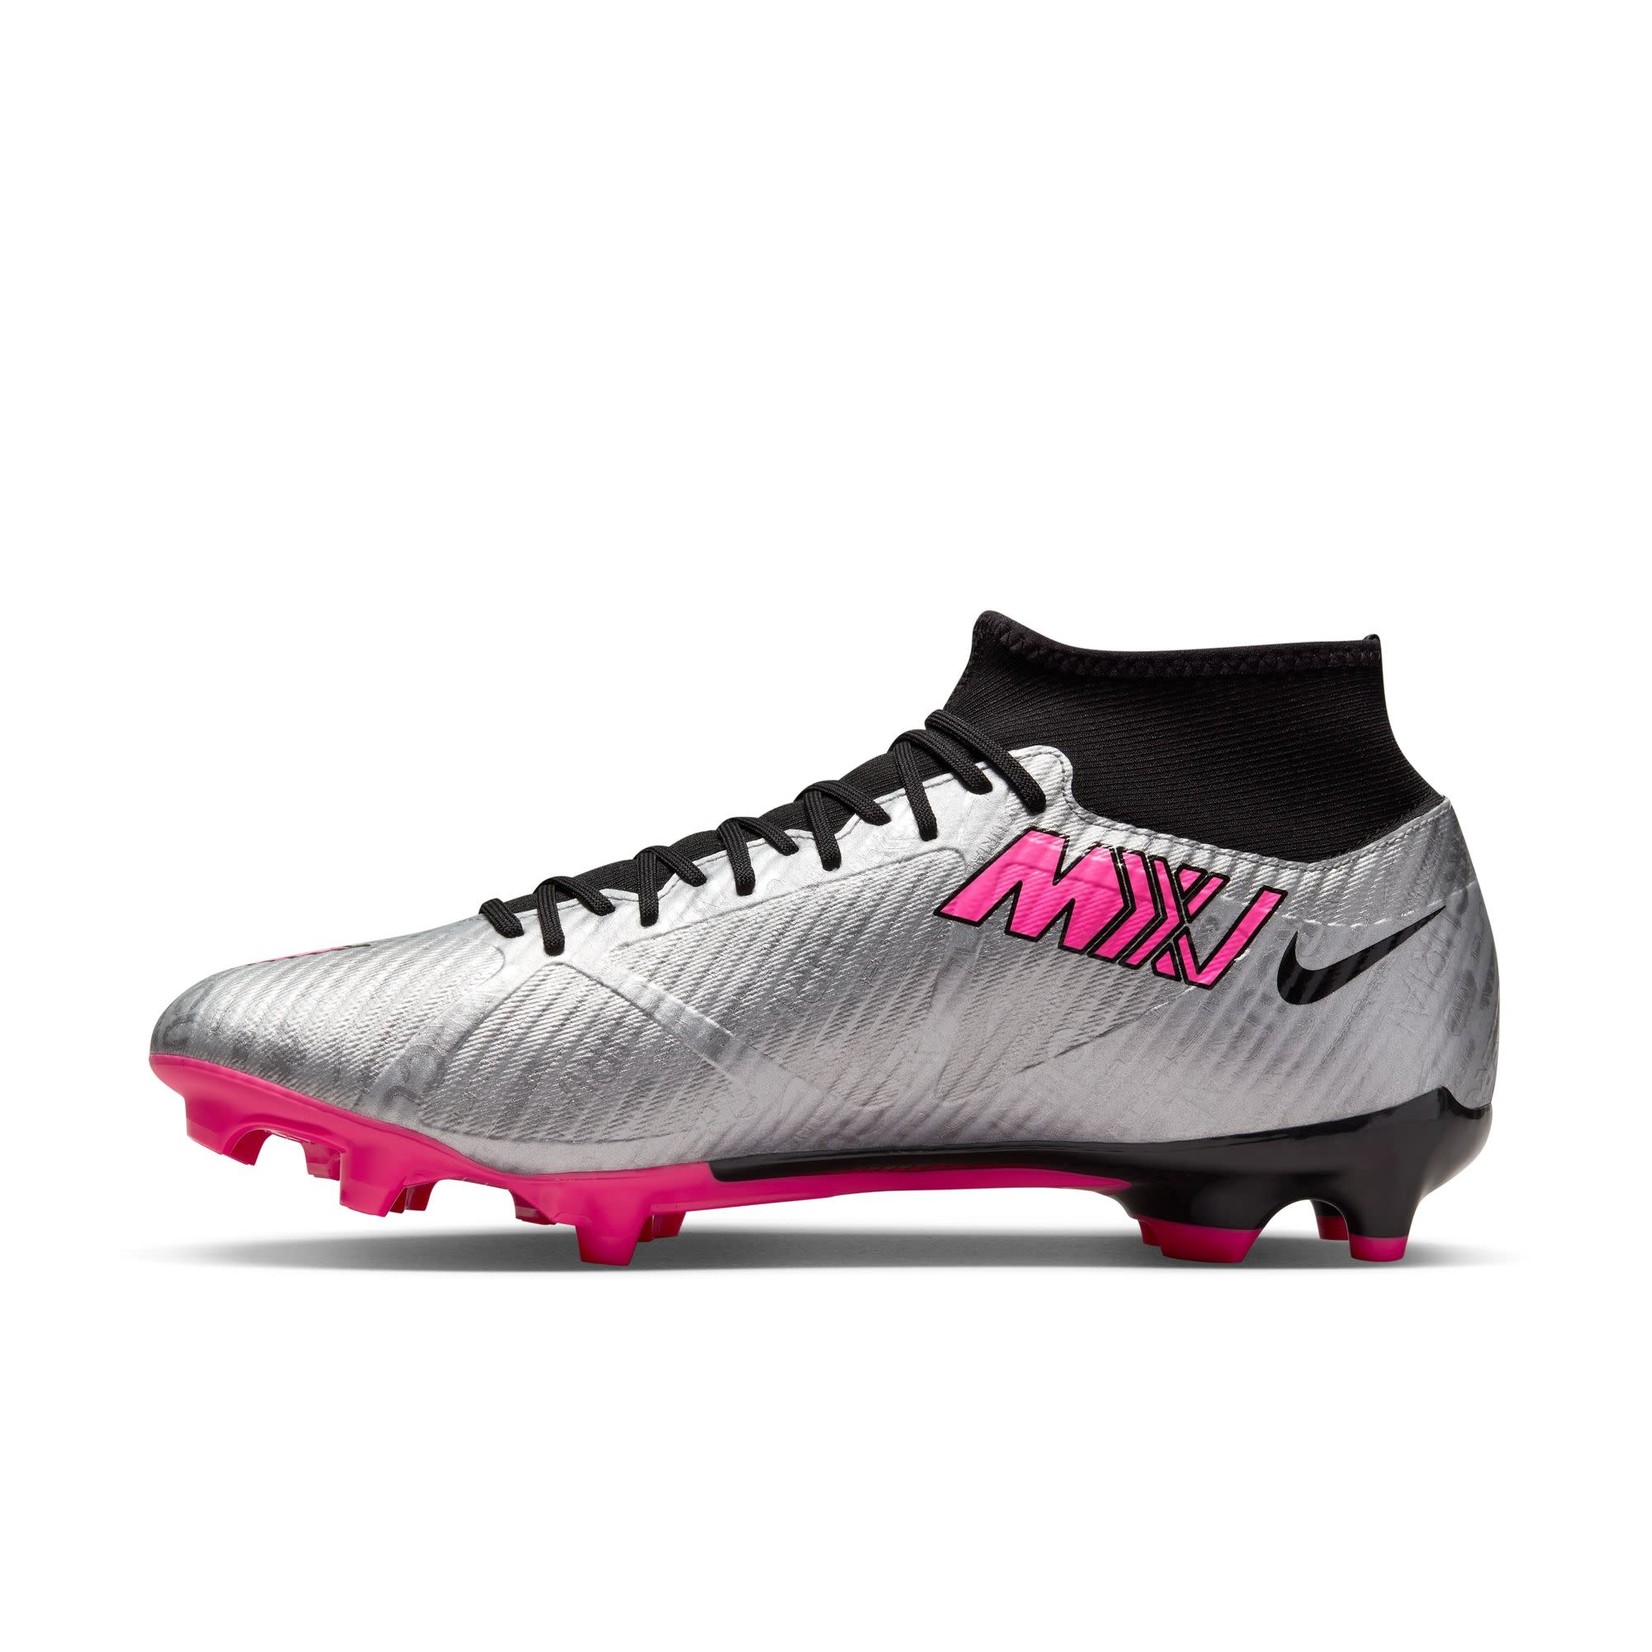 mercurial cleats mexico